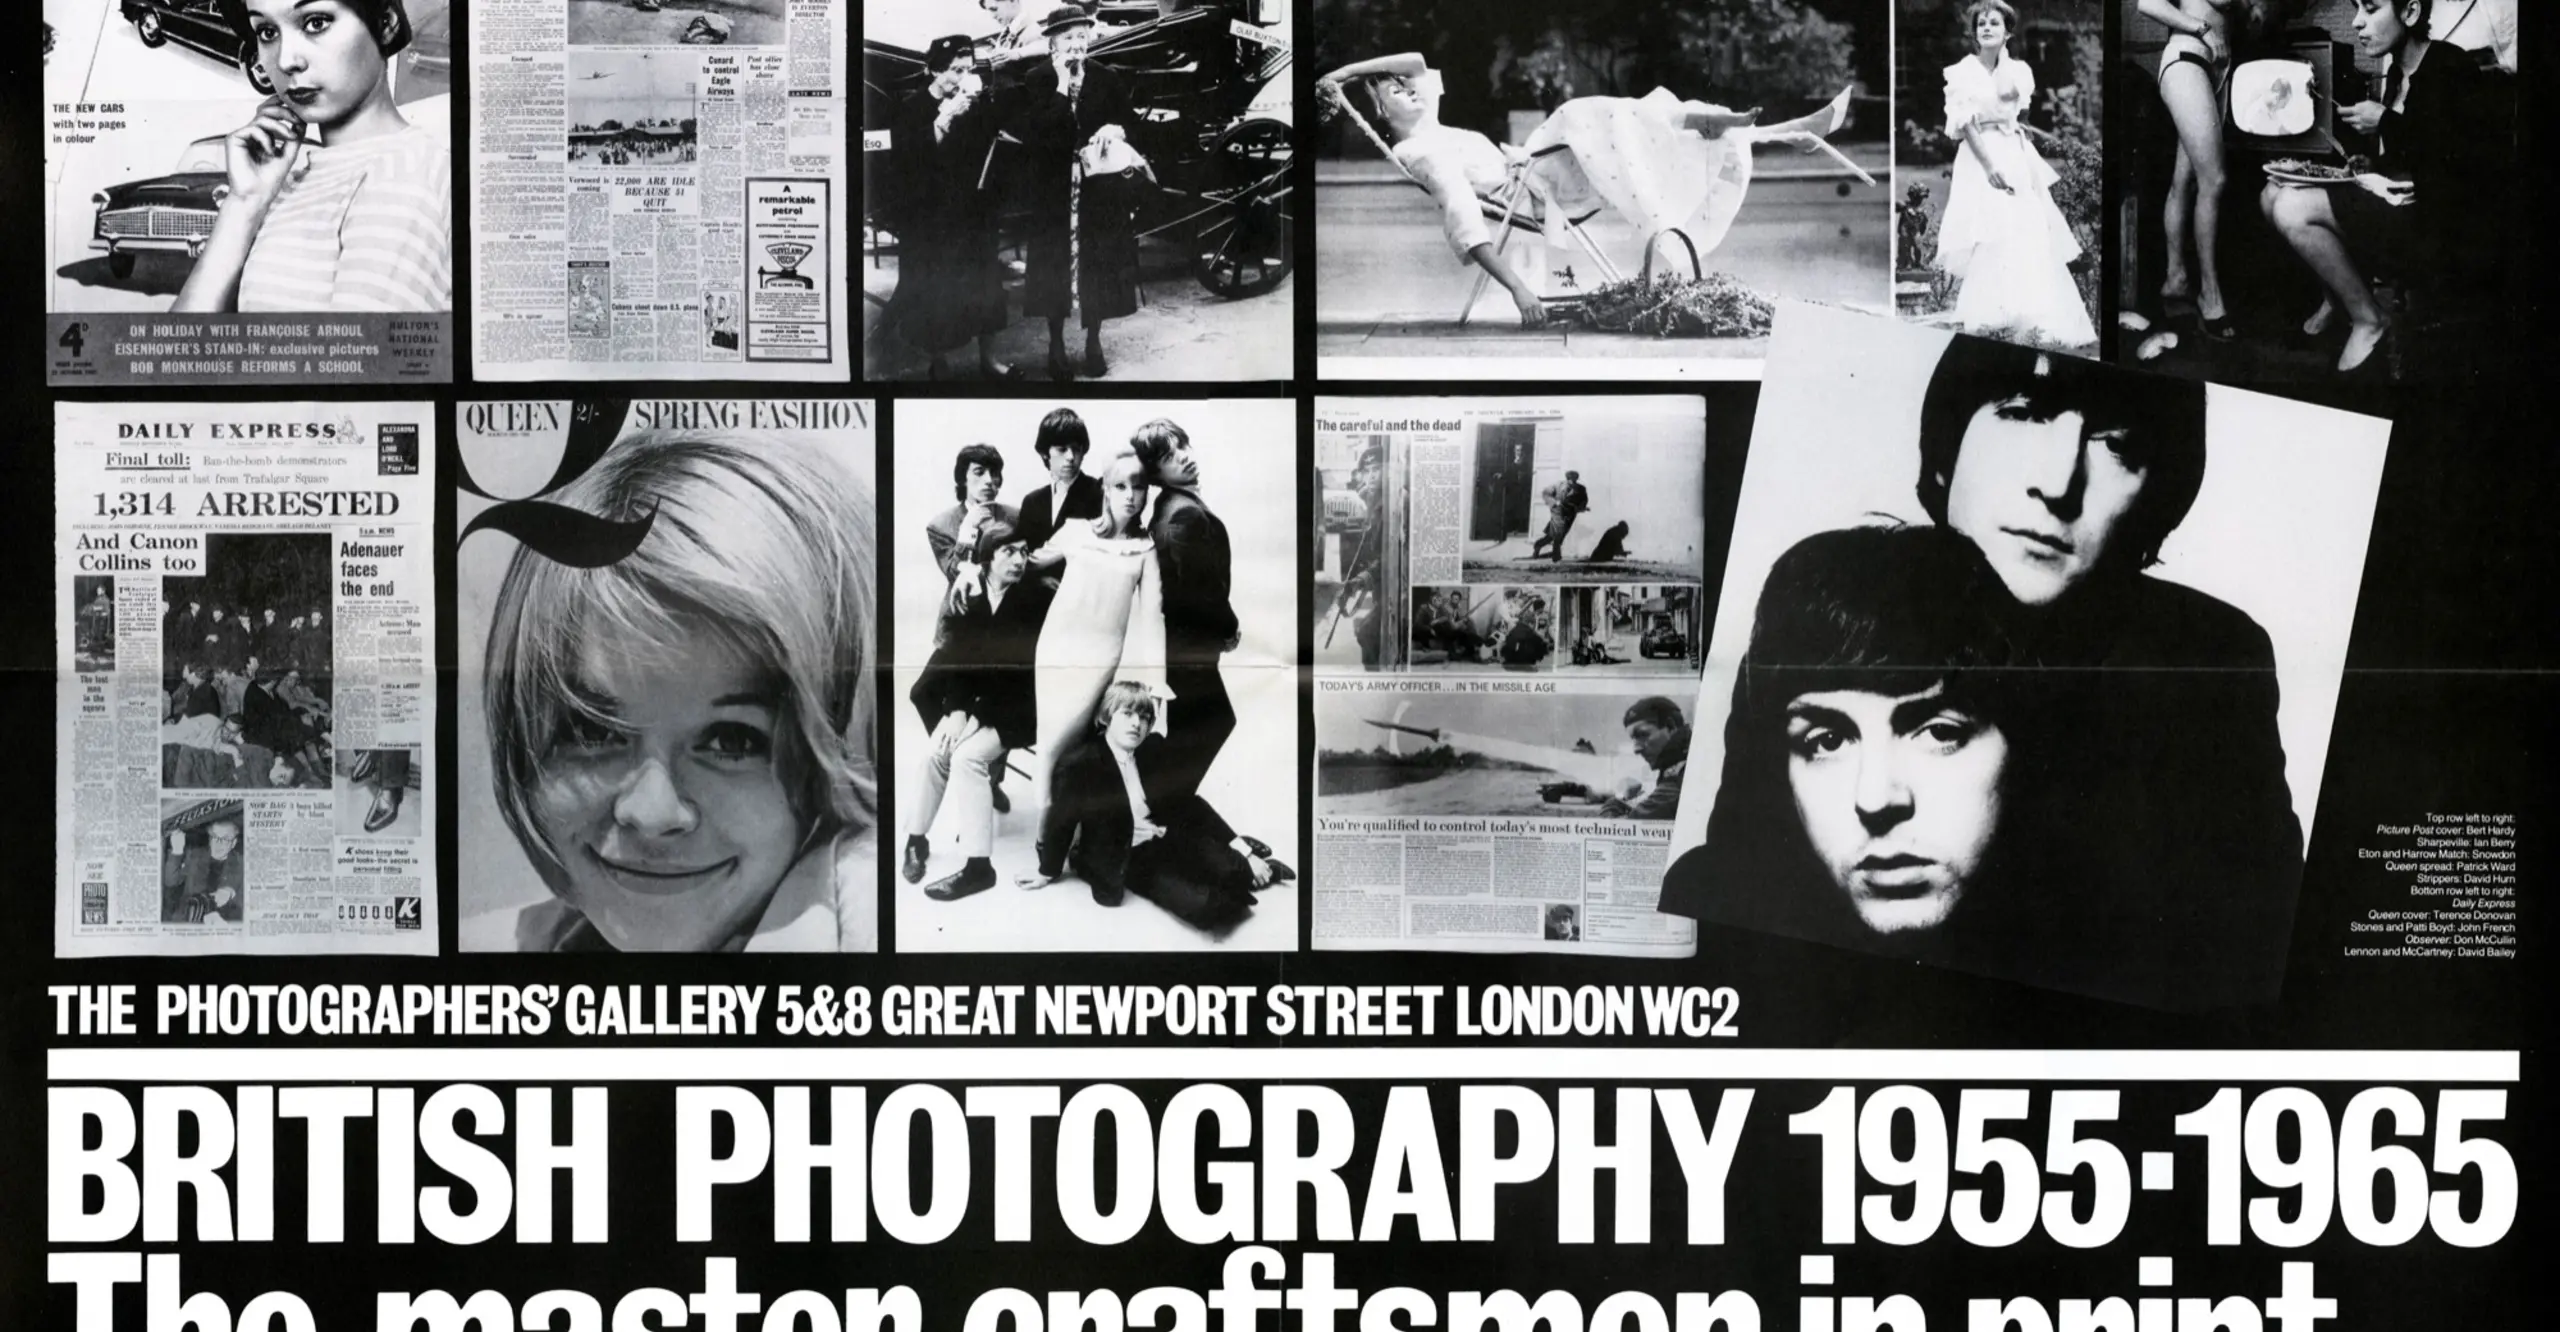 Poster courtesy The Photographers' Gallery Archive, 1983